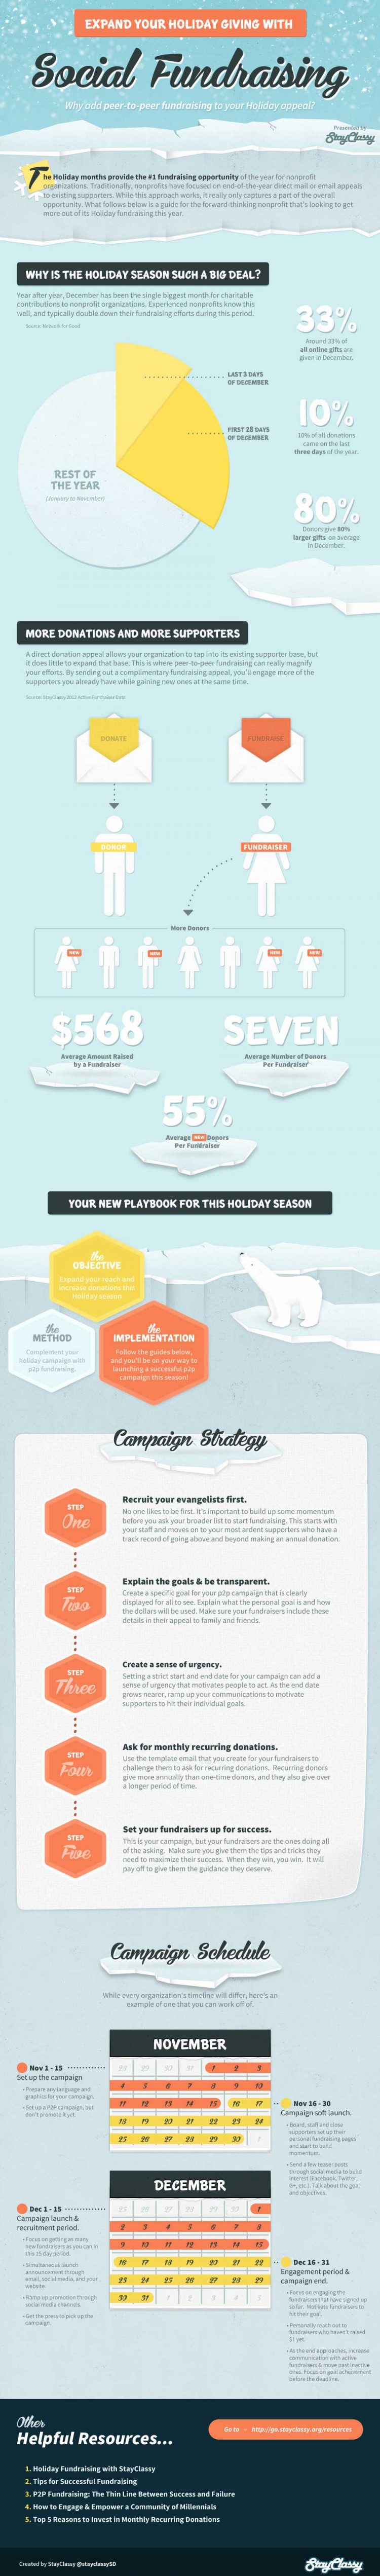 peer to peer holiday fundraising infographic